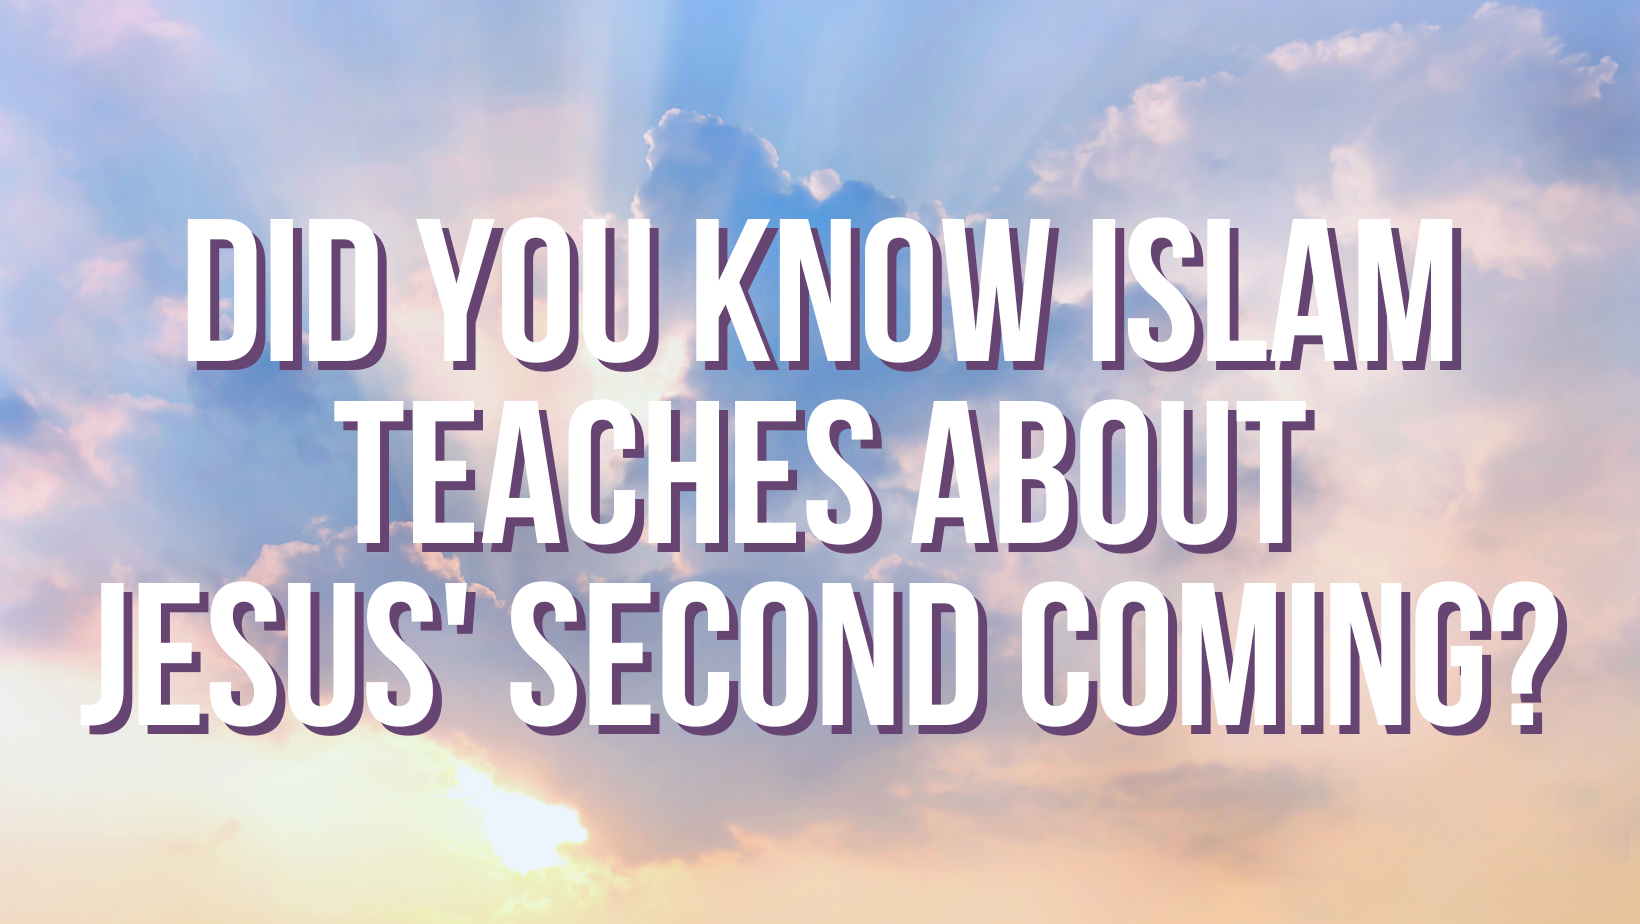 Did you know Islam teaches about Jesus' second coming?